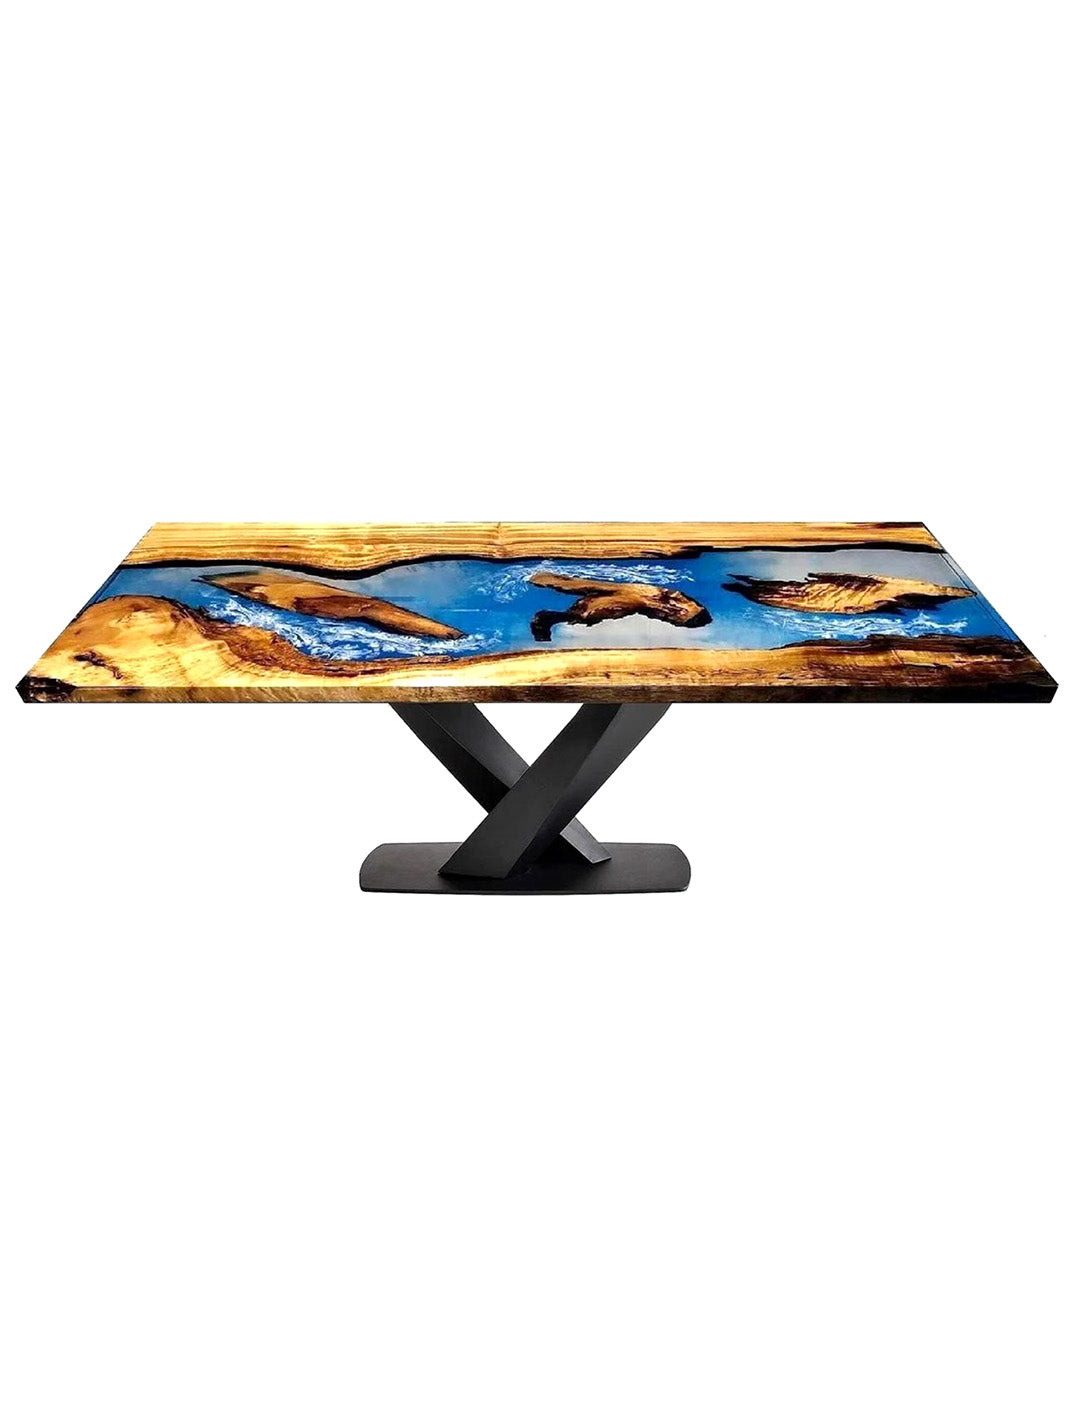 Handcrafted River Beach Epoxy Resin Wooden Coffee Table| 150x60cm Made 4 Decor Tables MDR0015-4